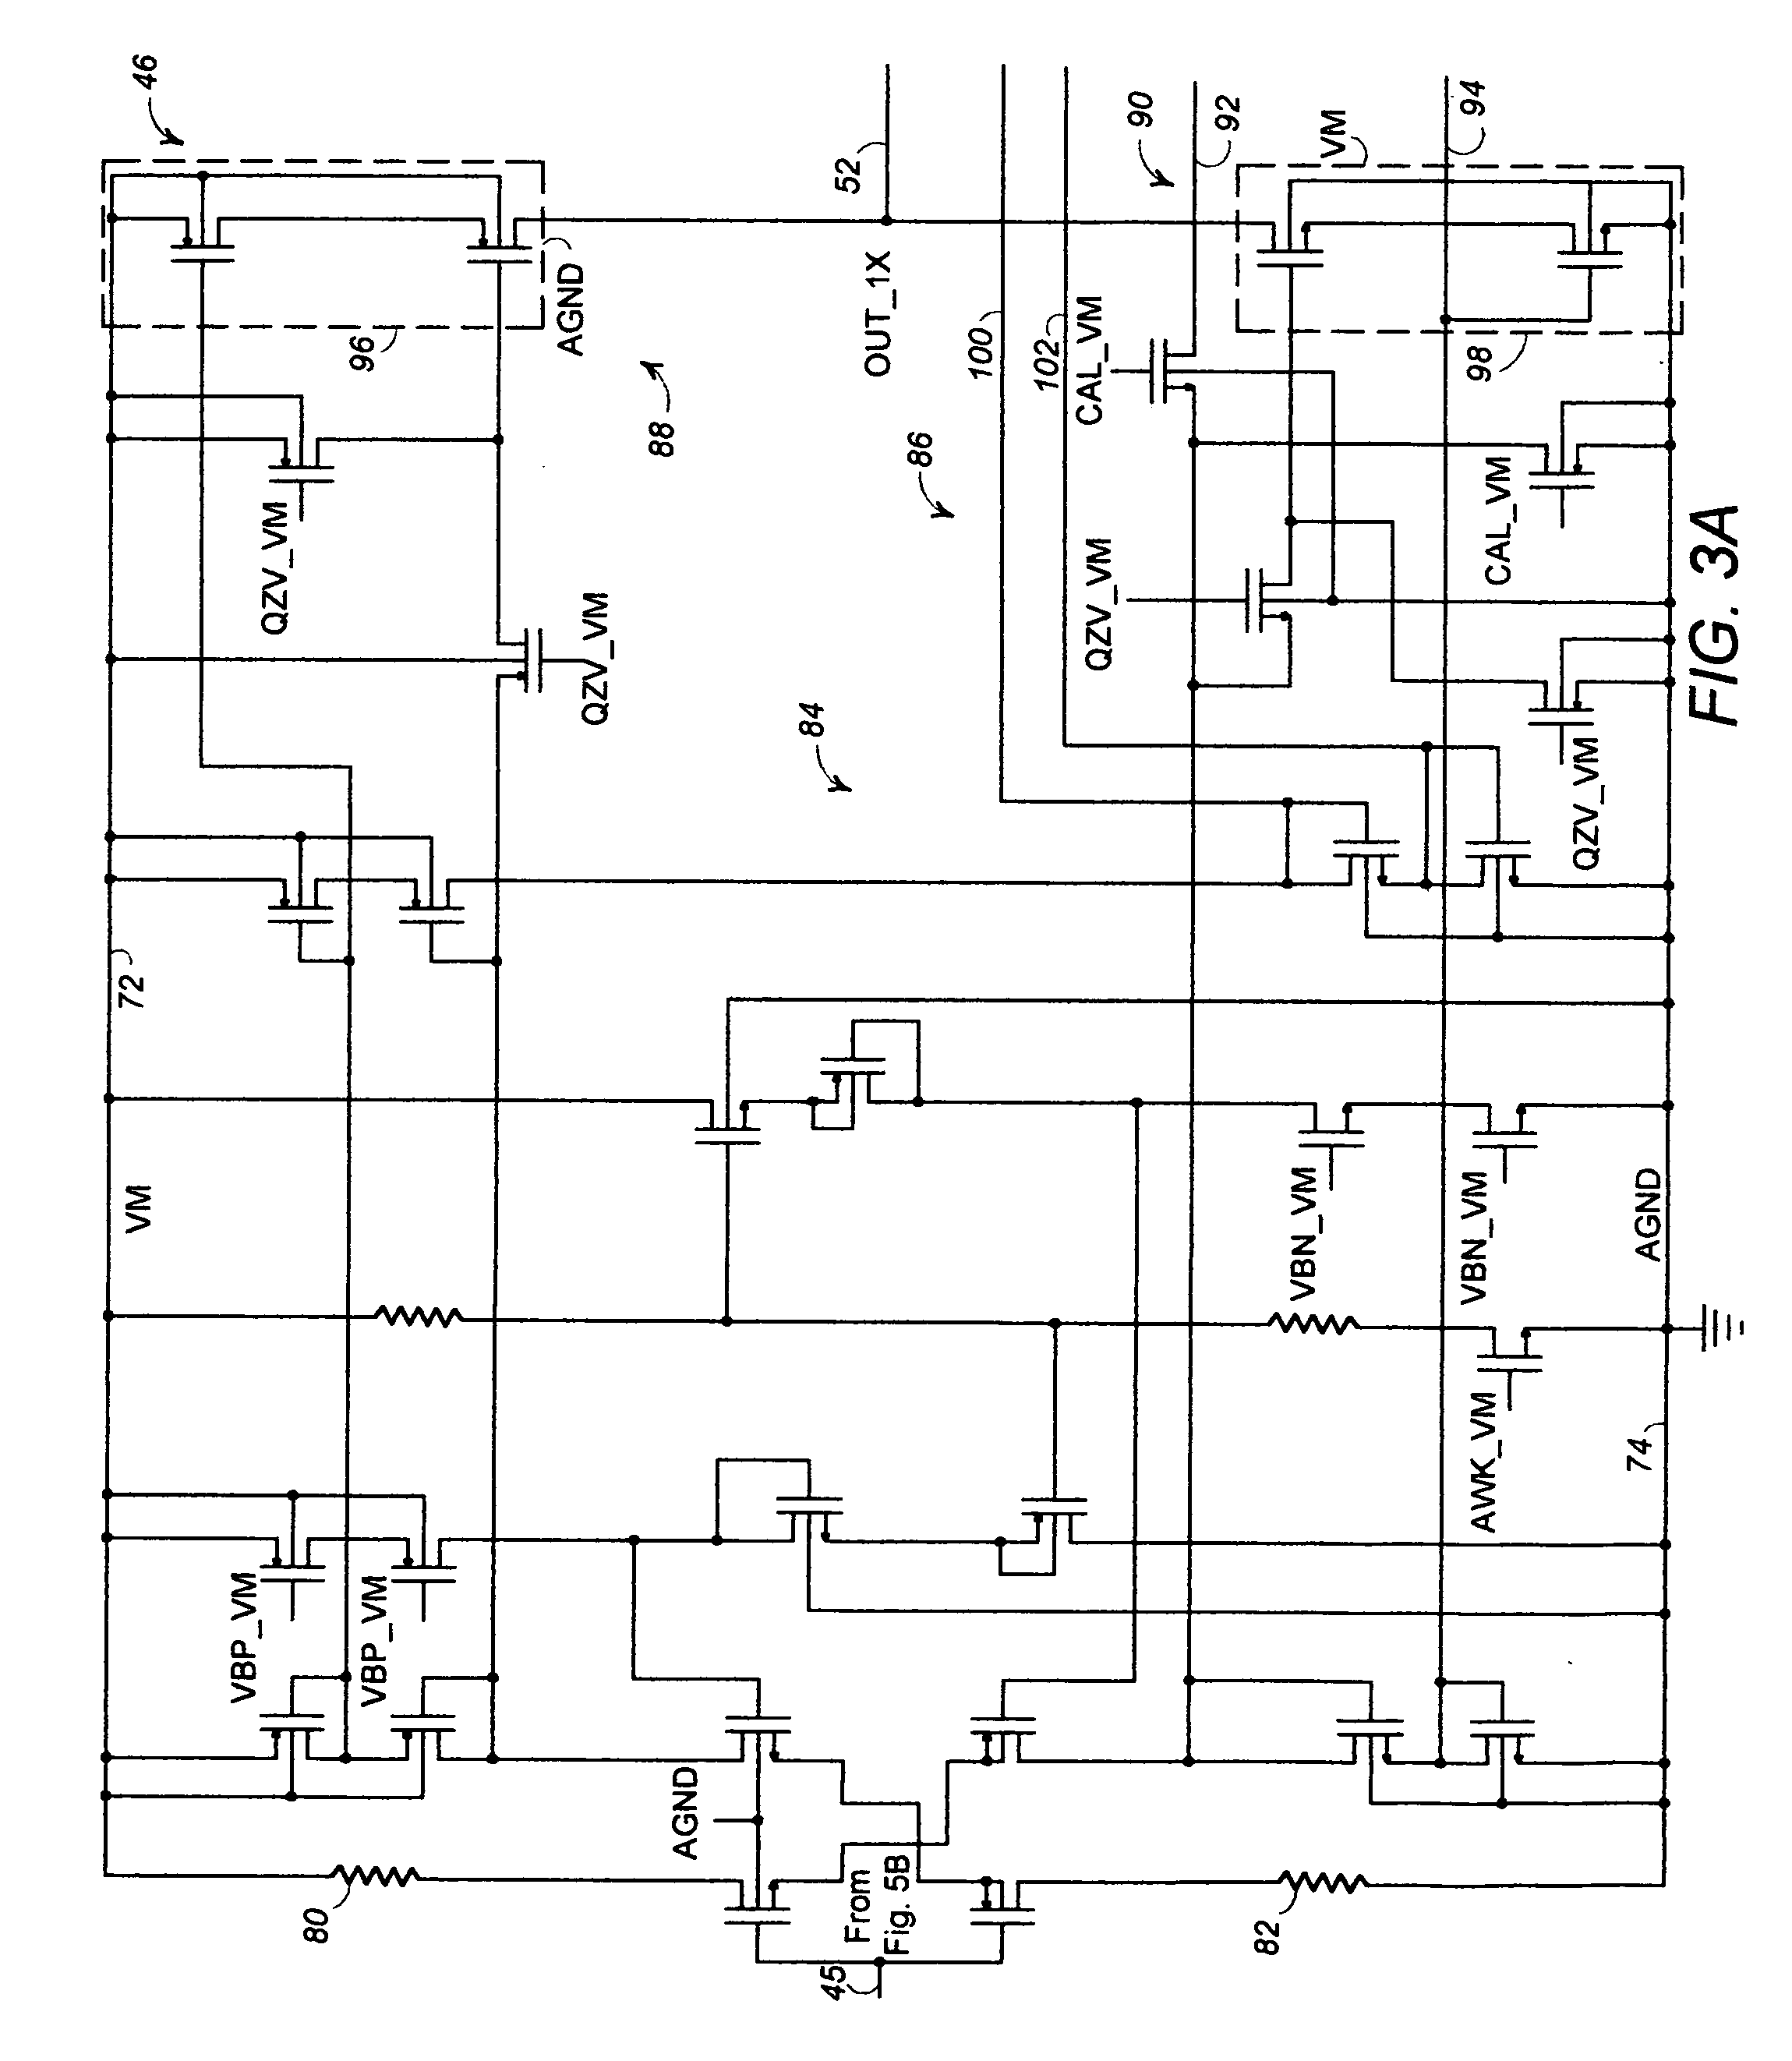 Adjustable compensation of a piezo drive amplifier depending on mode and number of elements driven